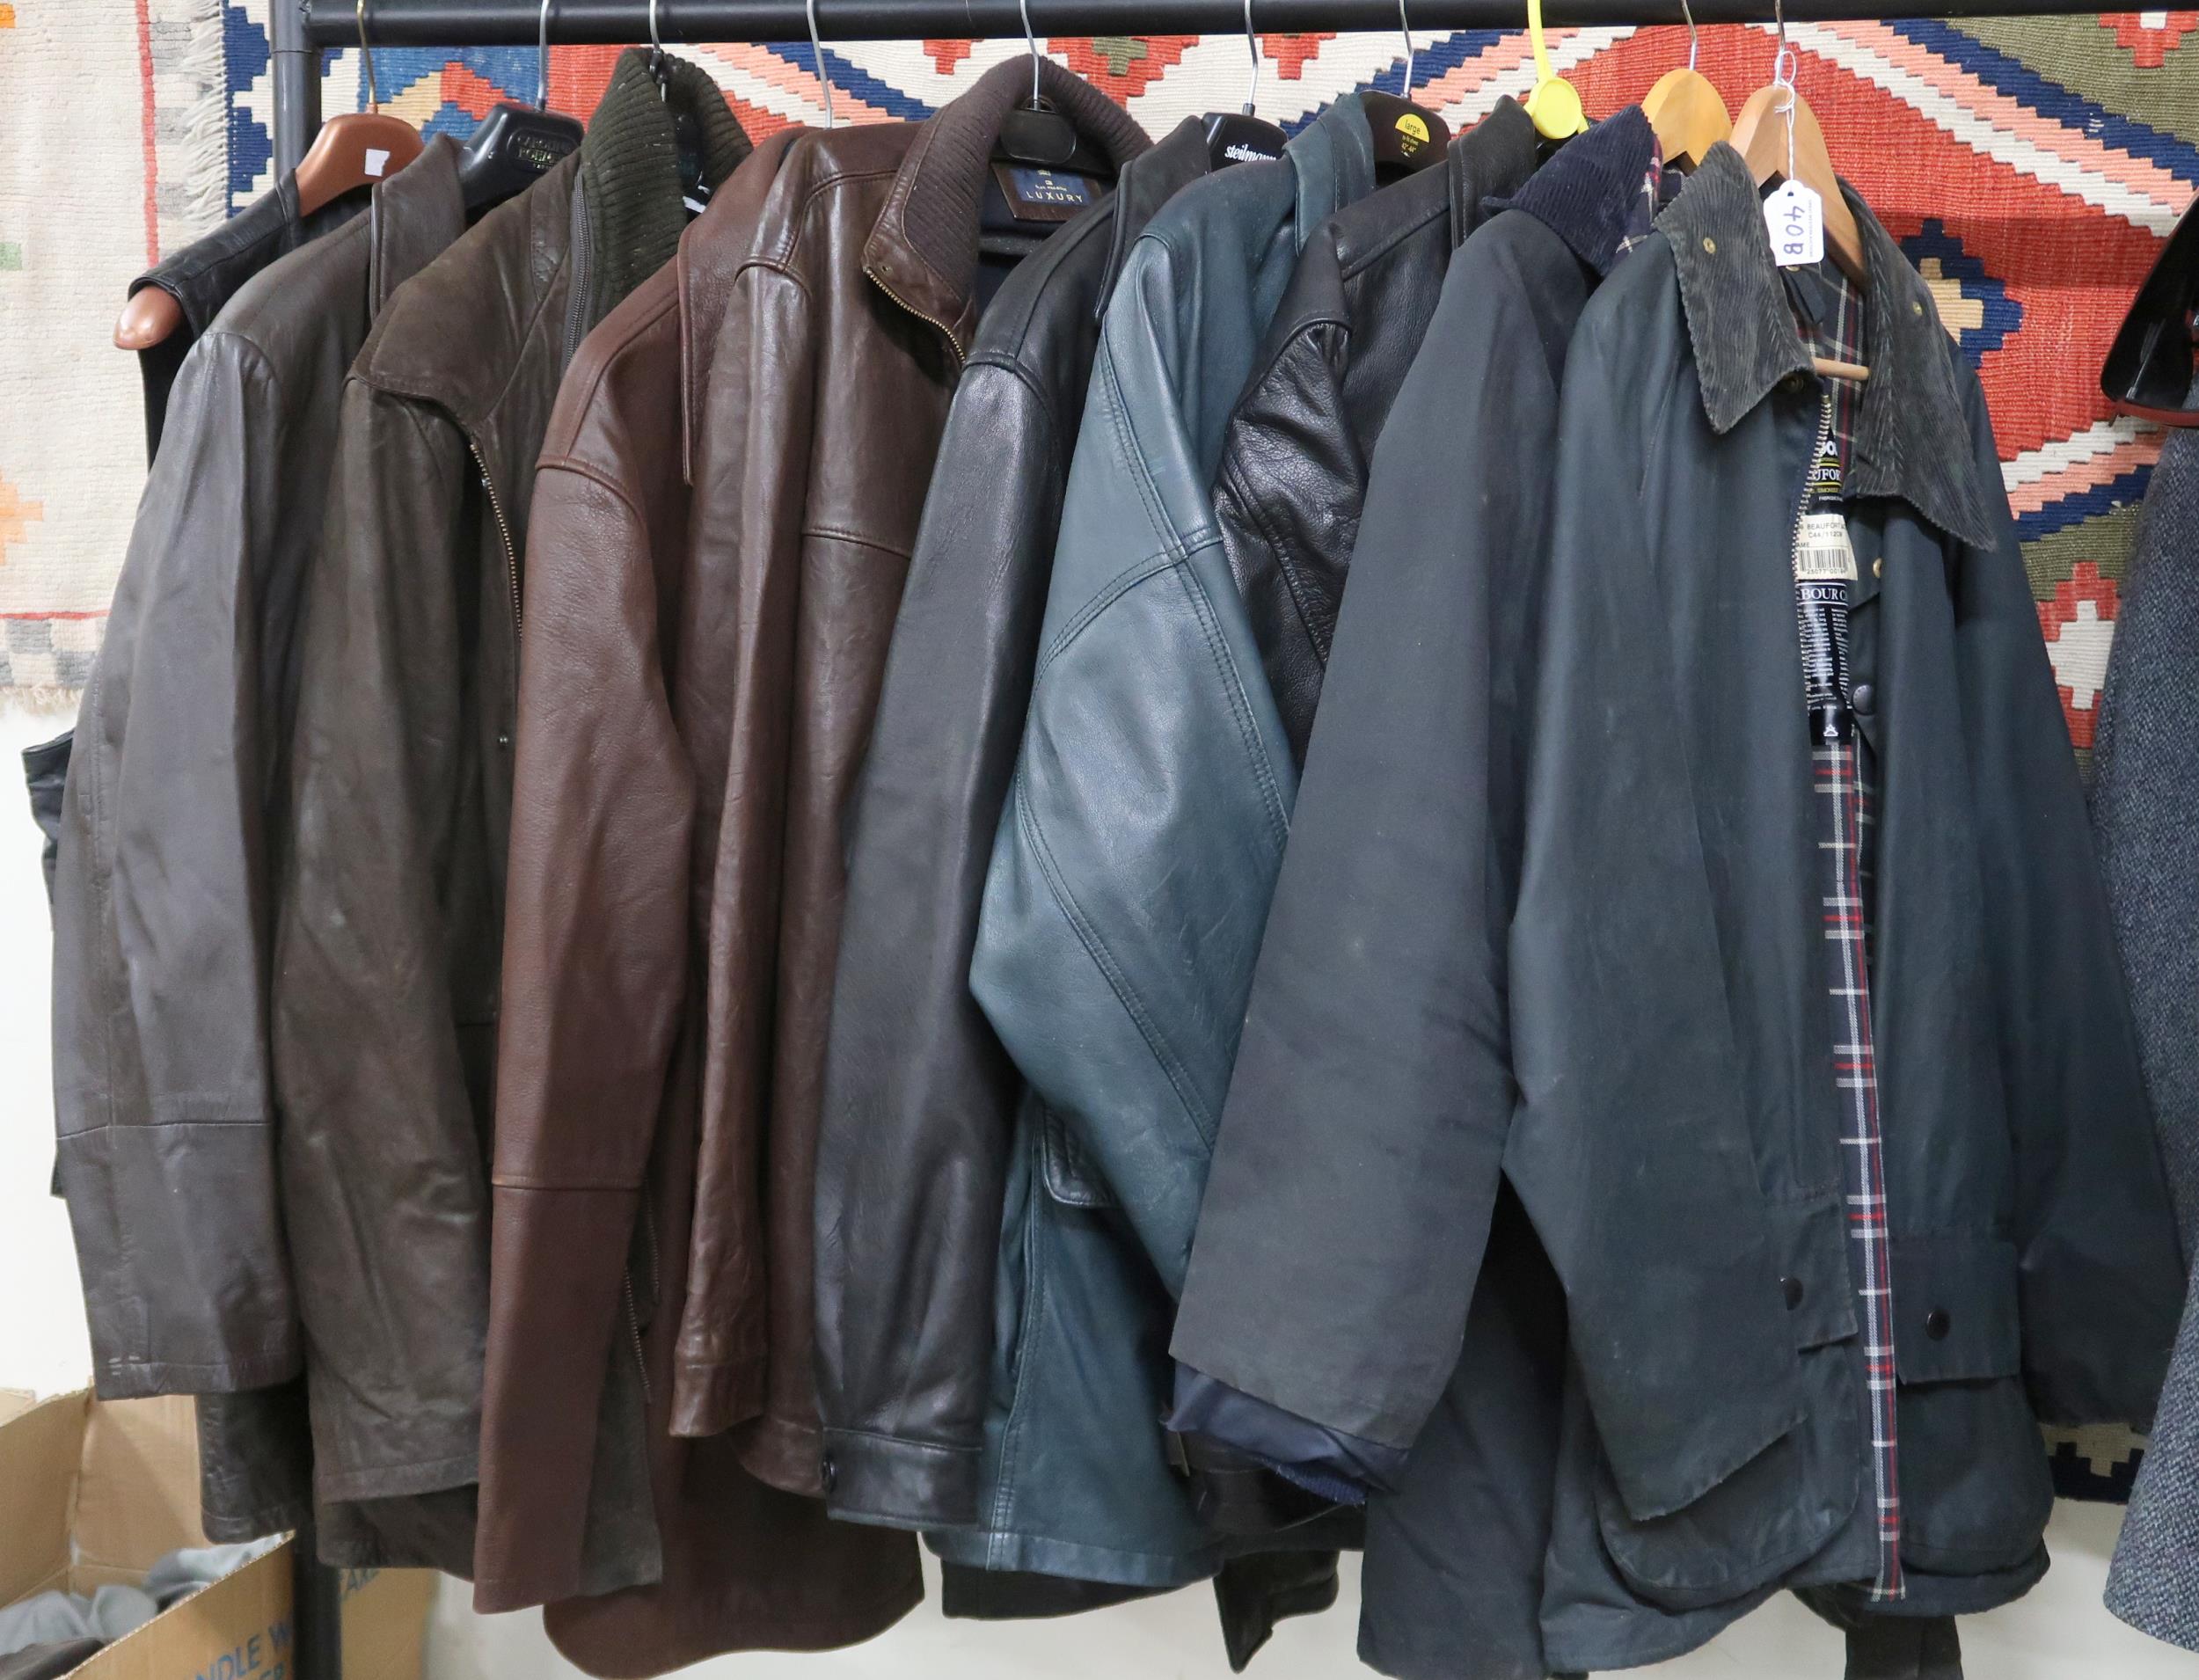 A large mixed lot of gents jackets/coats with numerous leather and waxed canvas examples to